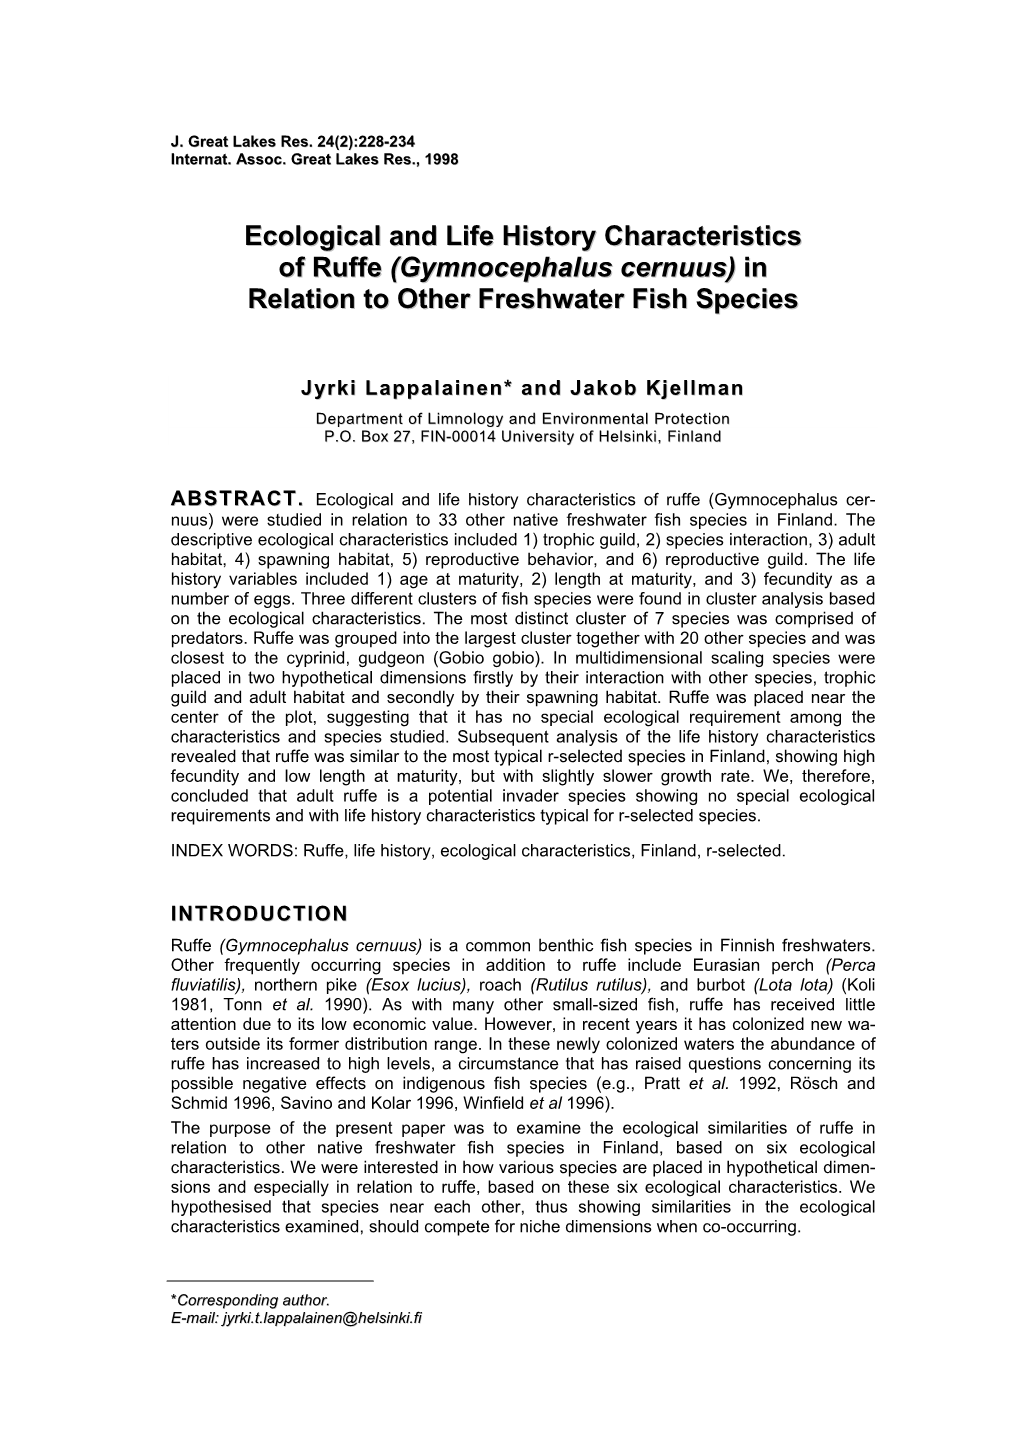 Ecological and Life History Characteristics of Ruffe (Gymnocephalus Cernuus) in Relation to Other Freshwater Fish Species